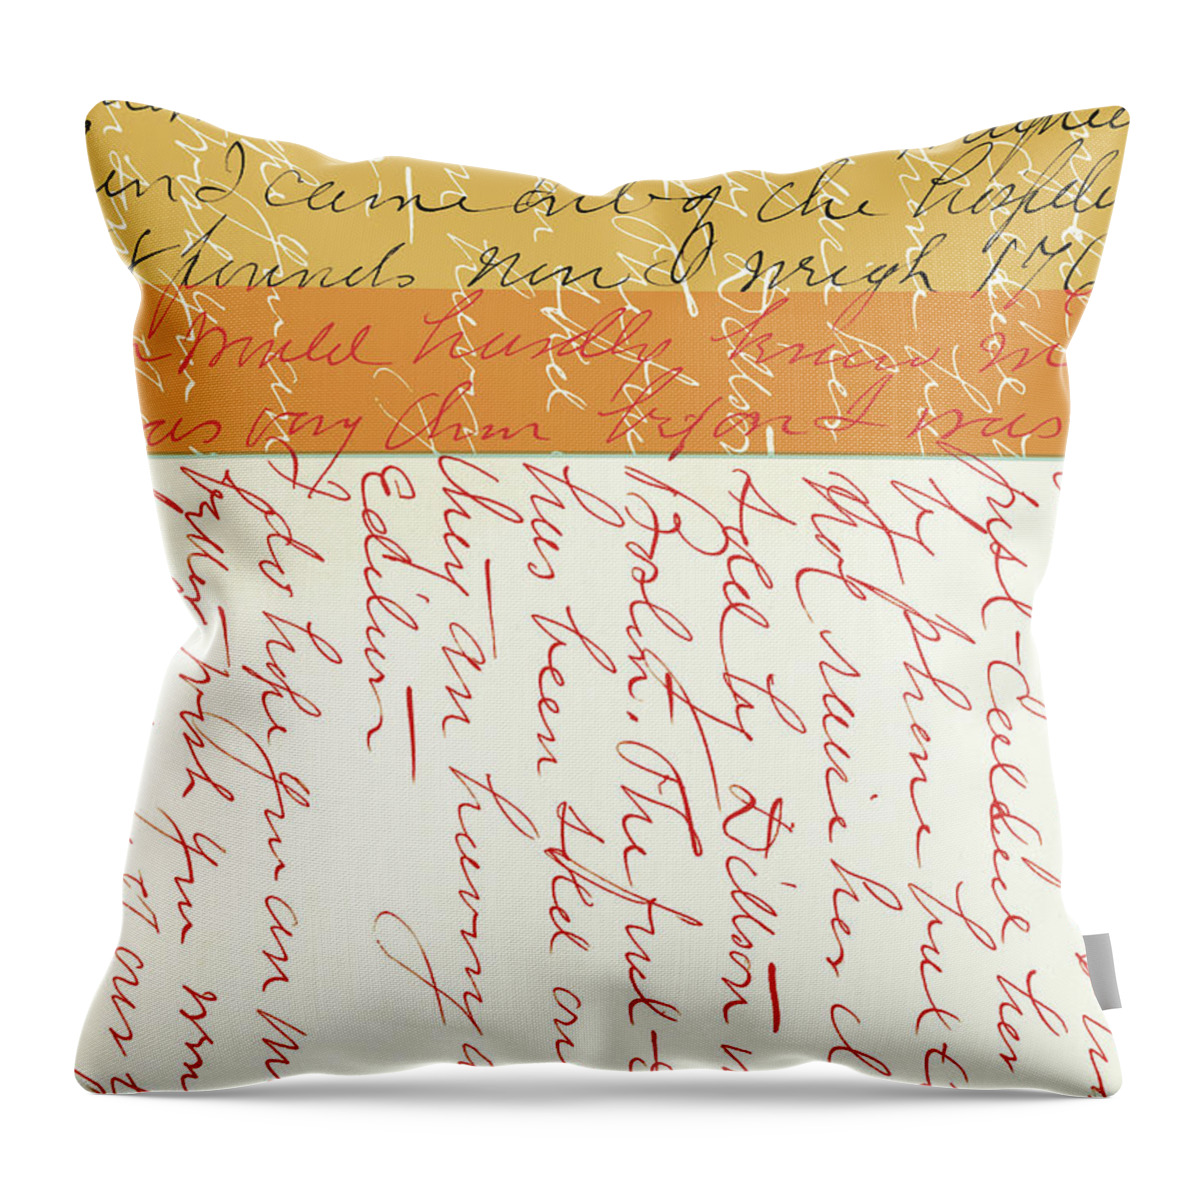 Author Throw Pillow featuring the drawing Hand Written Letter #15 by CSA Images